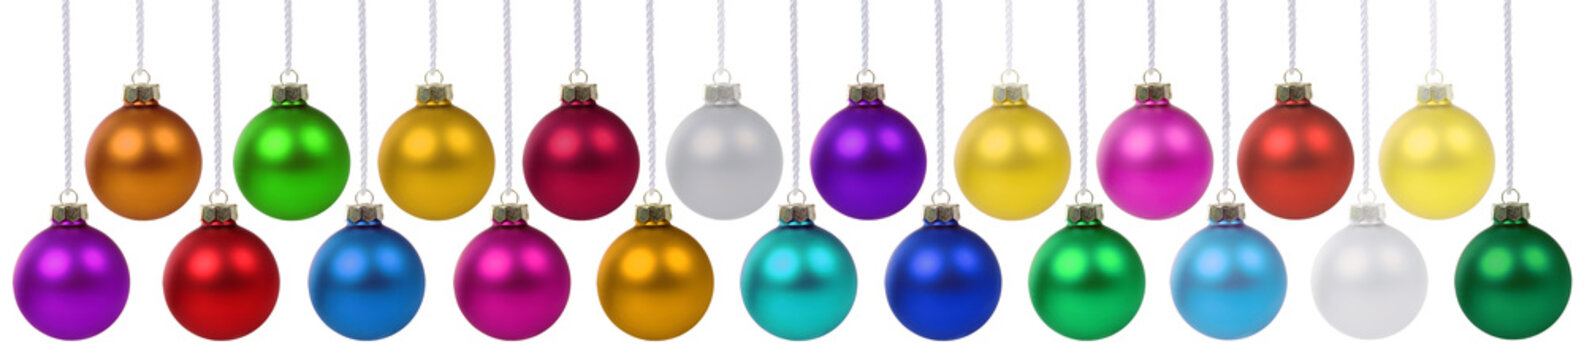 Christmas ornaments many balls baubles decoration banner hanging isolated on white